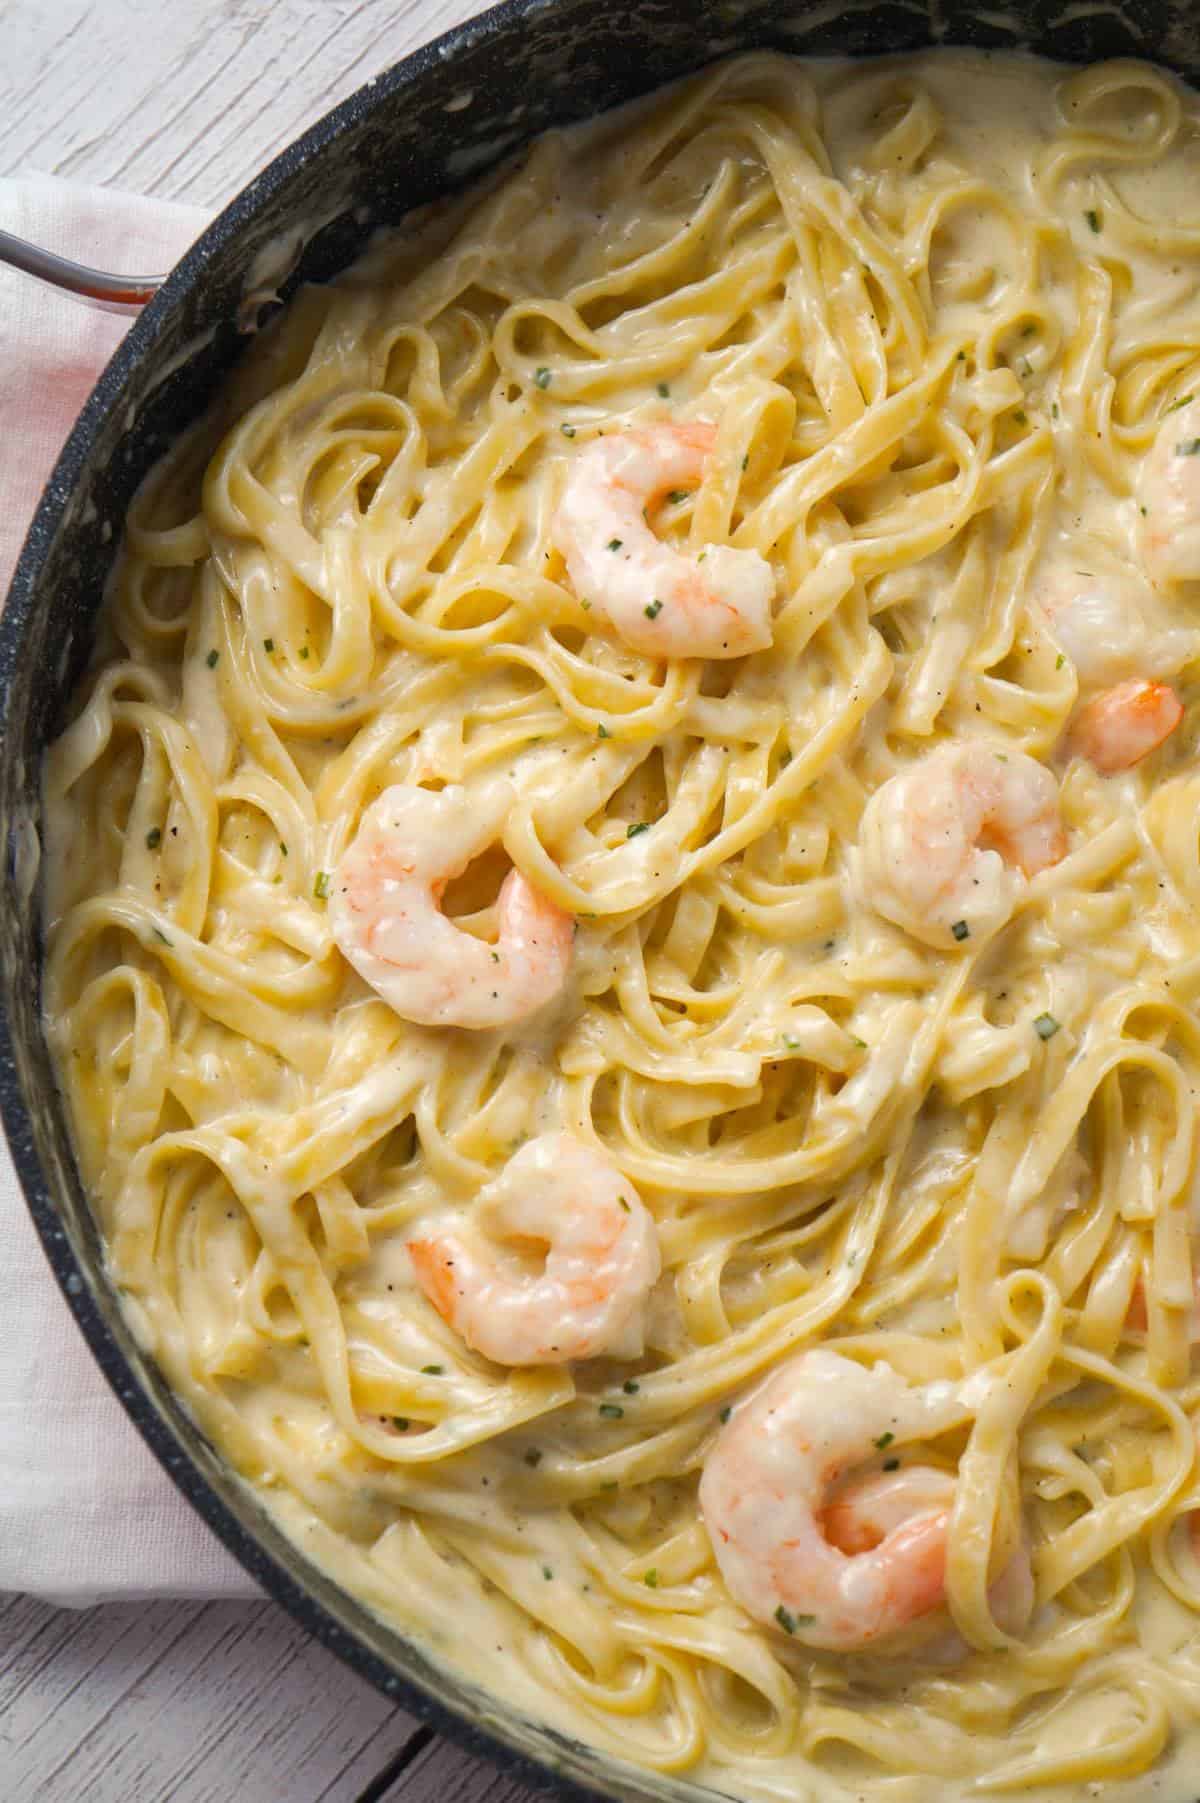 Fettuccine Alfredo with Shrimp - THIS IS NOT DIET FOOD